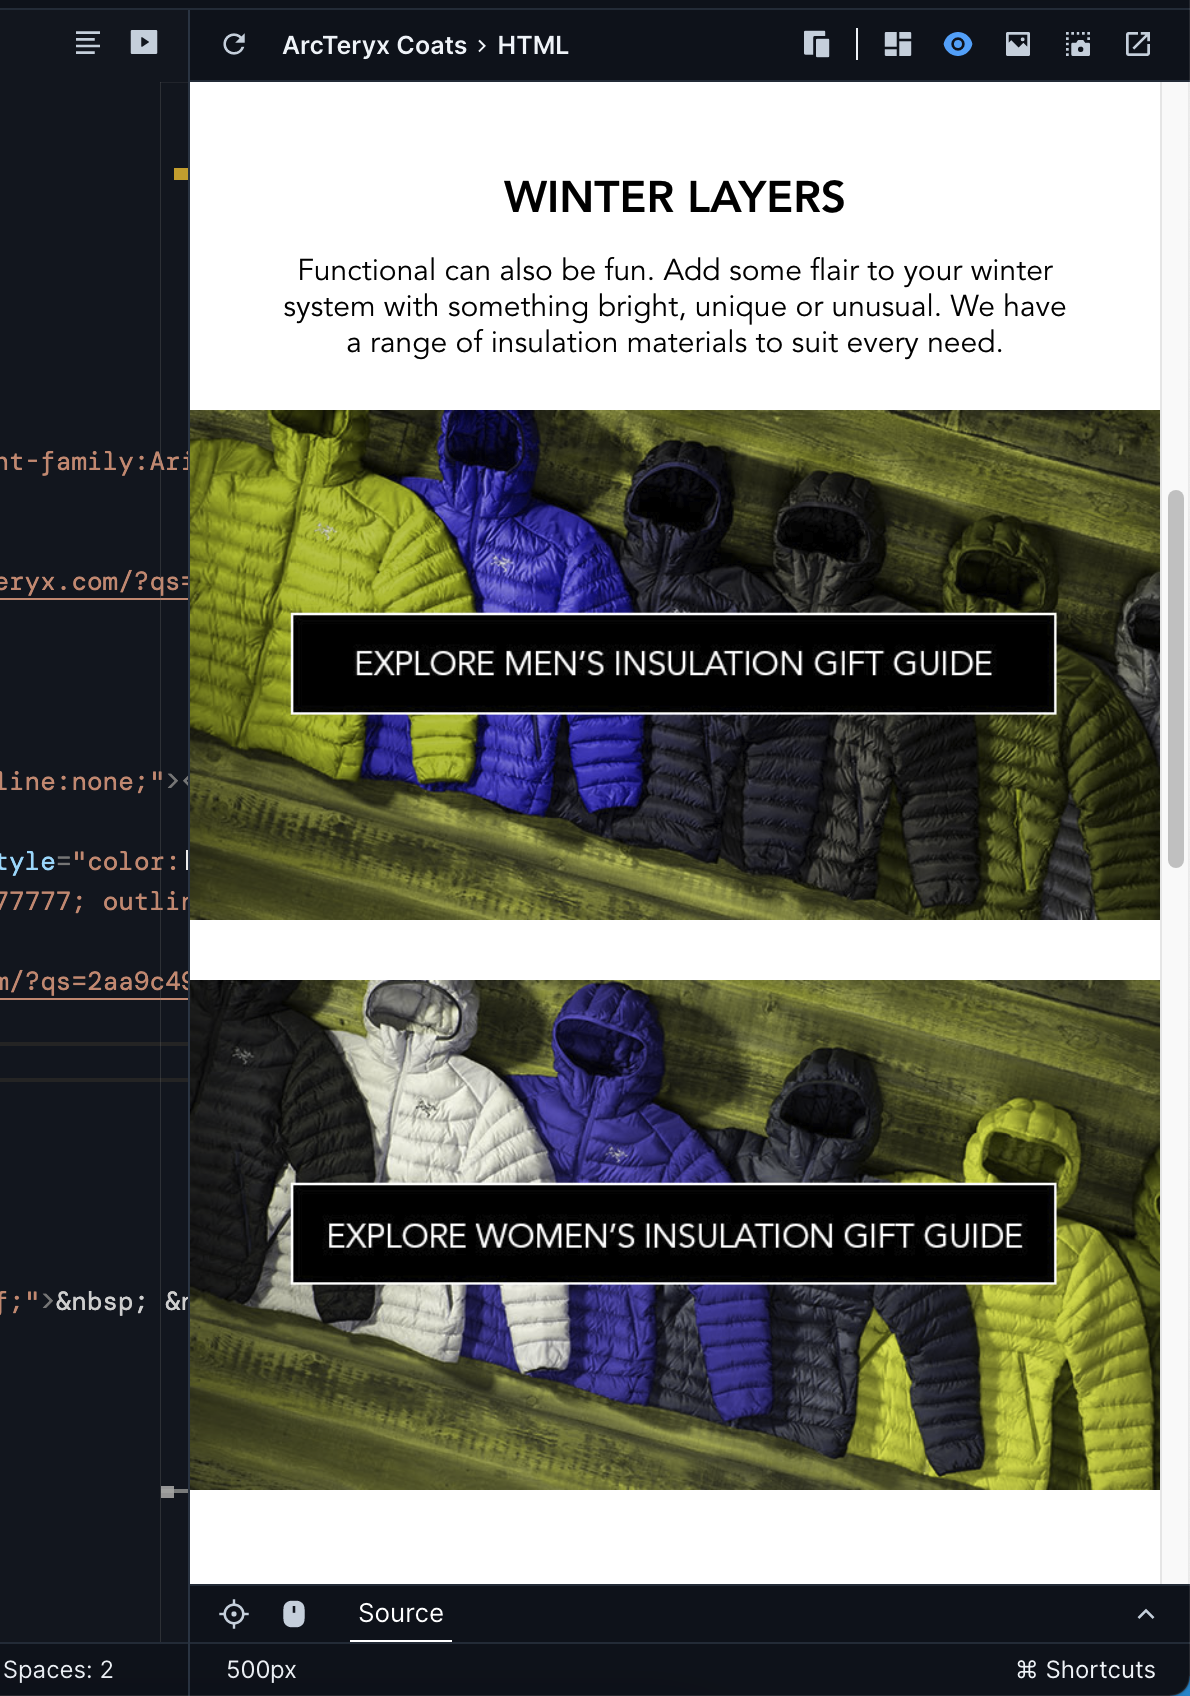 Up close image of the Preview, showing the same email advertising winter jackets. The jackets in the first image now appear green, blue, dark blue, grey, greenish gray, and gray. The jackets in the second photo now appear black, white, blue, dark grey, green, and green.